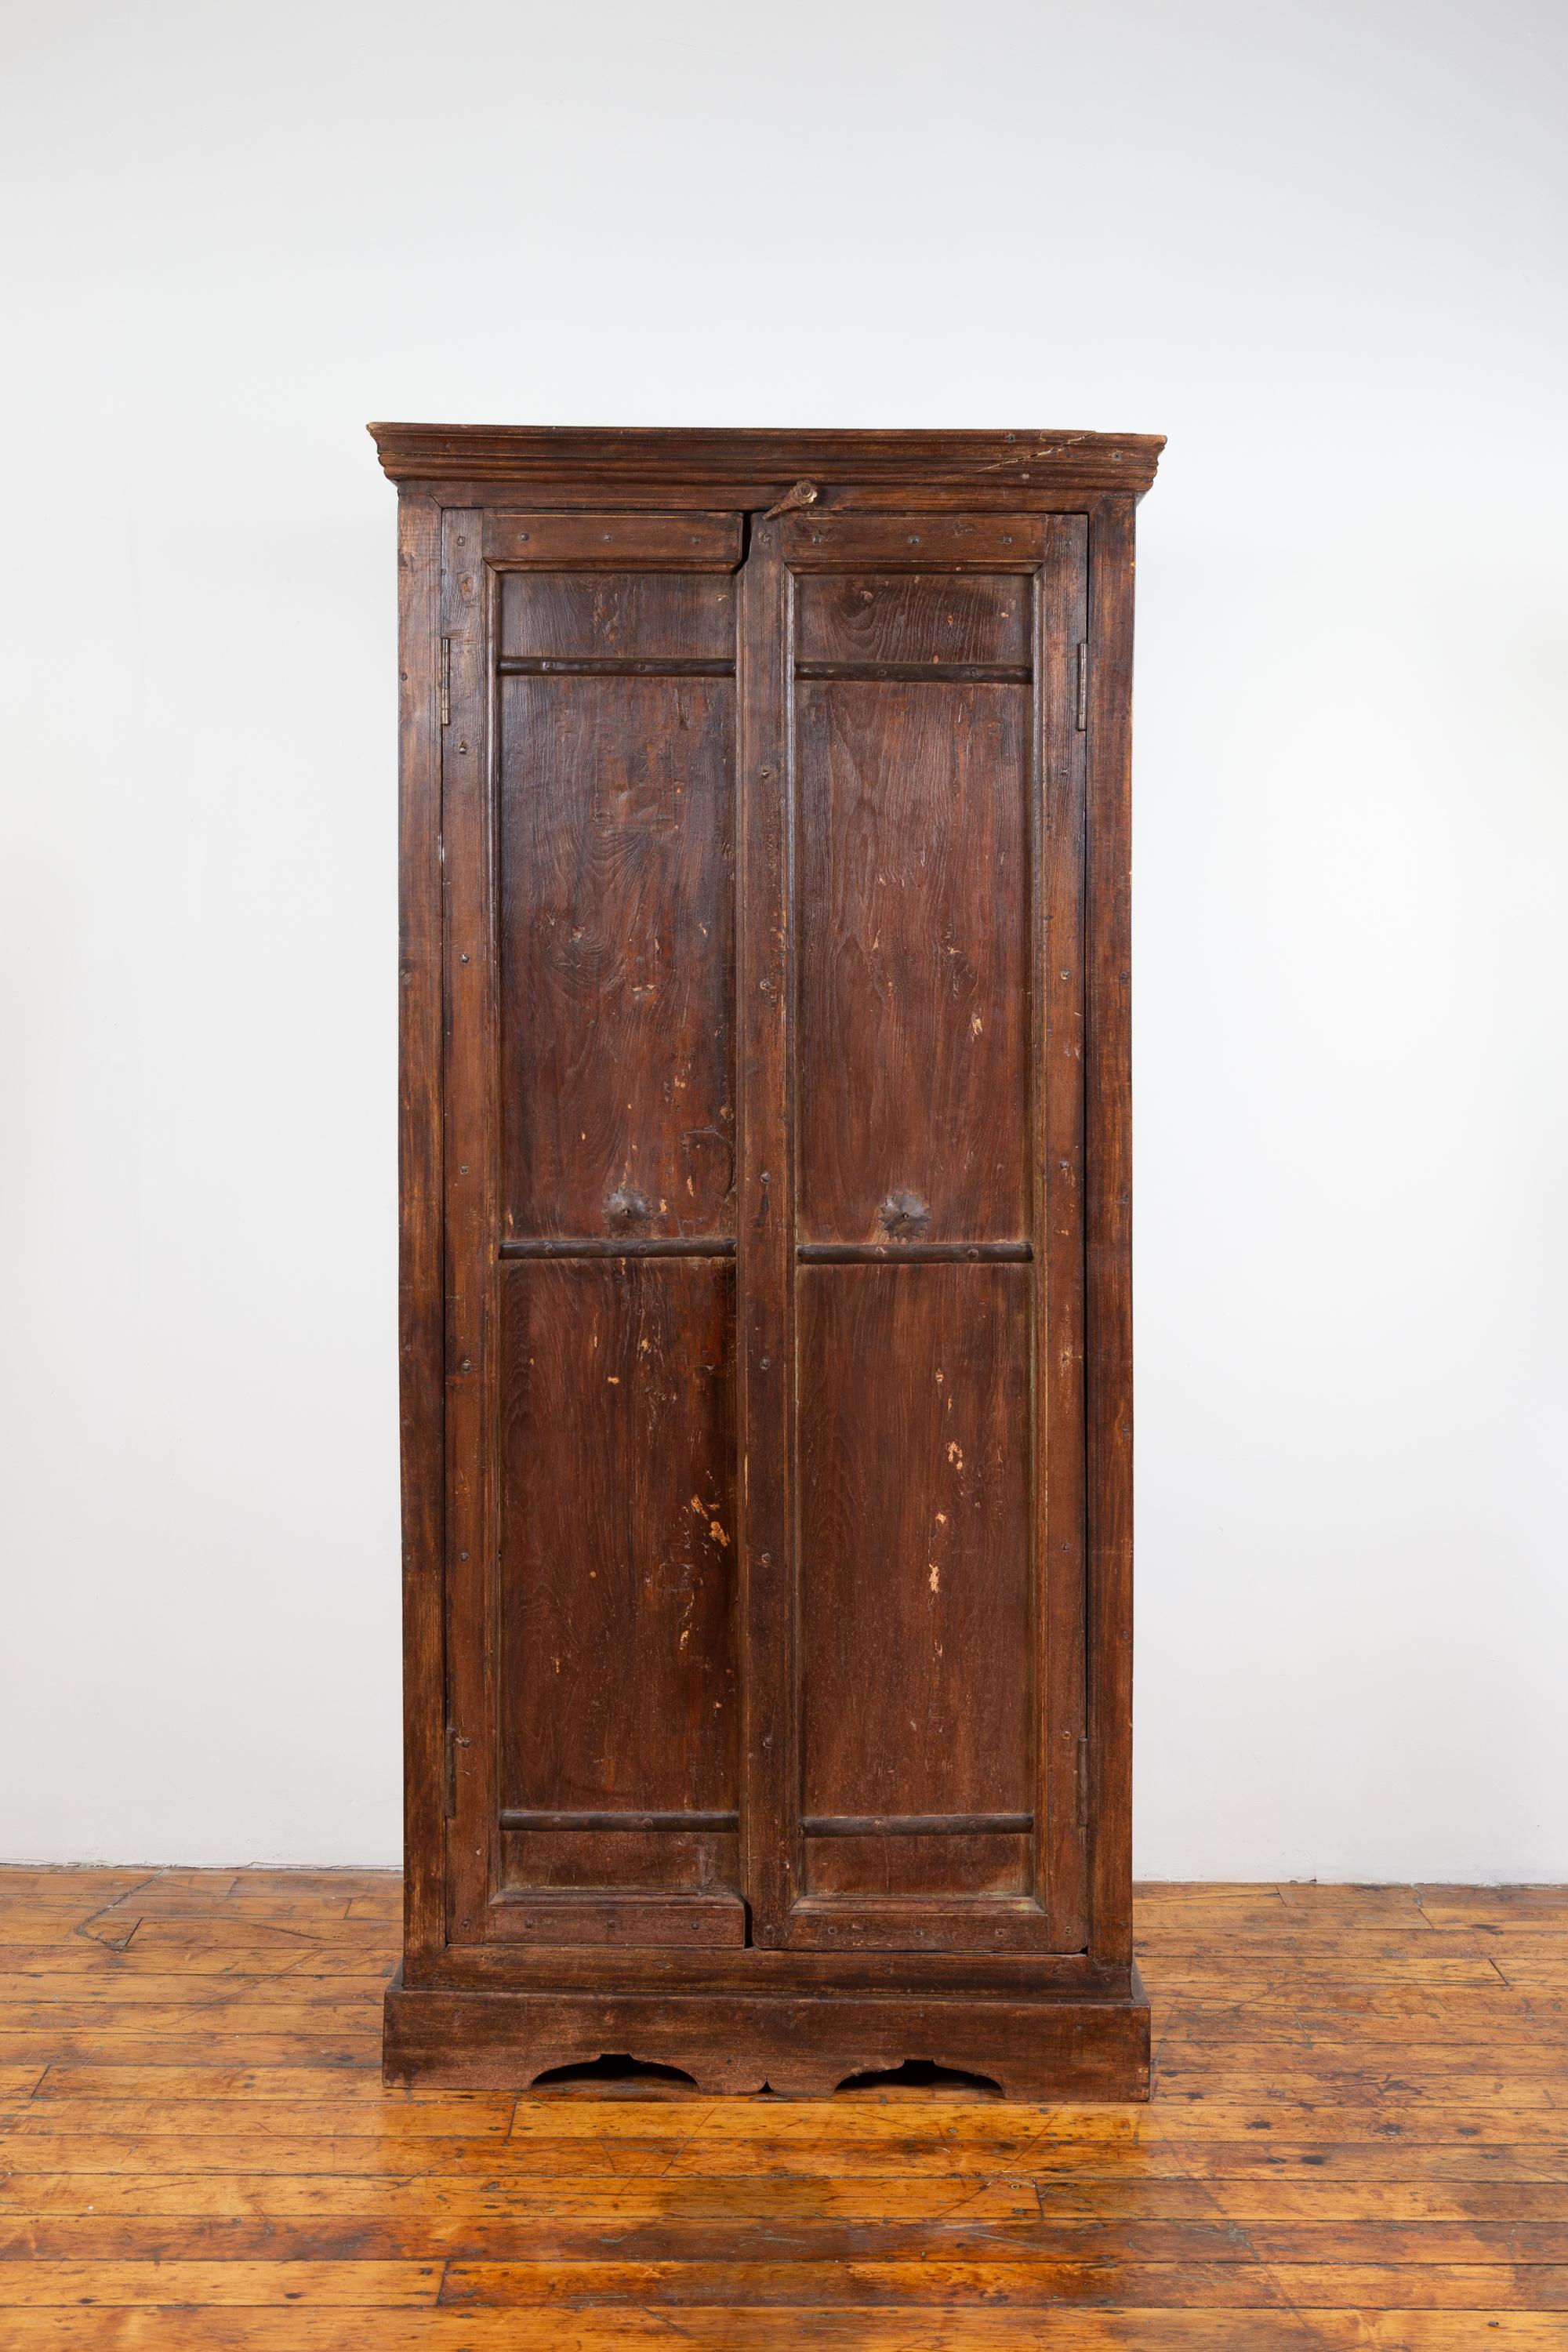 An antique Indian wooden armoire from the early 20th century with paneled doors and interior shelves. Born in India during the early years of the 20th century, this wooden armoire features a linear silhouette, accented with a molded cornice at the